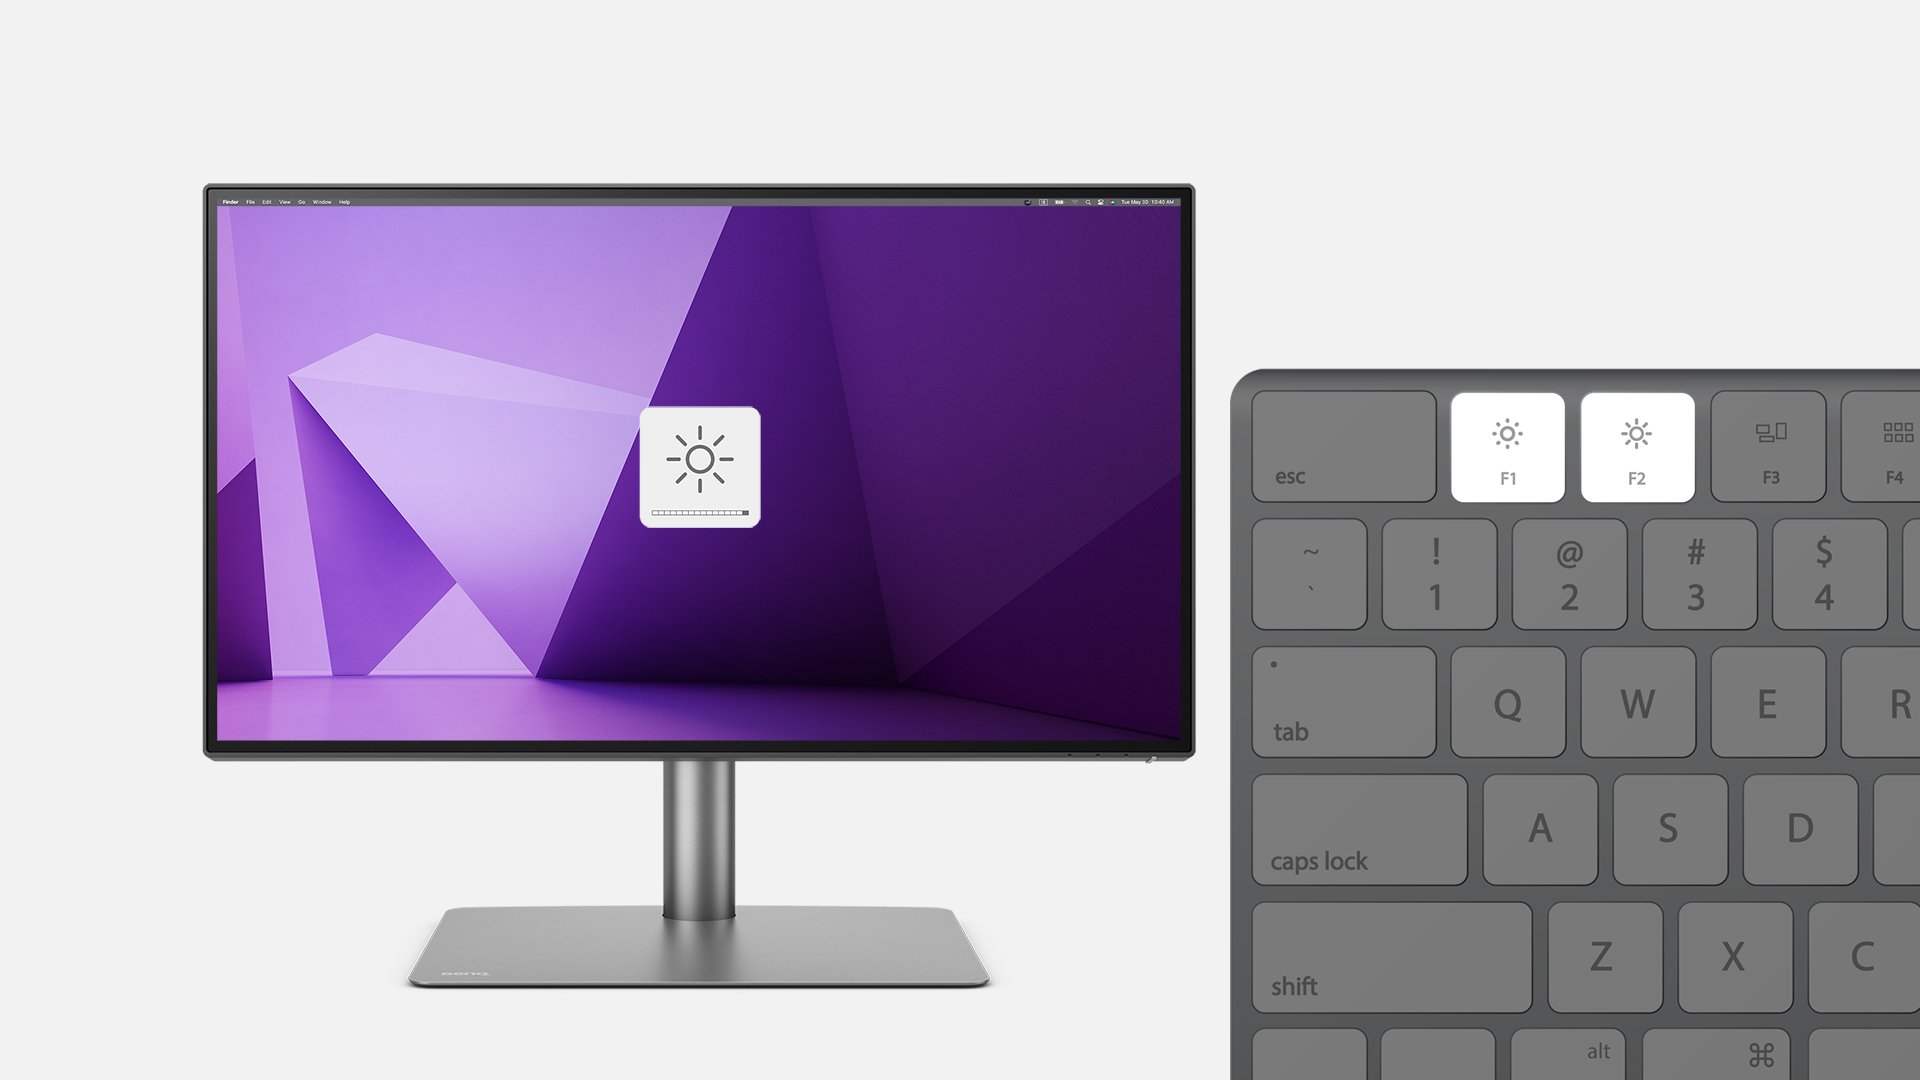 BenQ Display Pilot 2 let you adjust display brightness respectively with your Mac keyboard